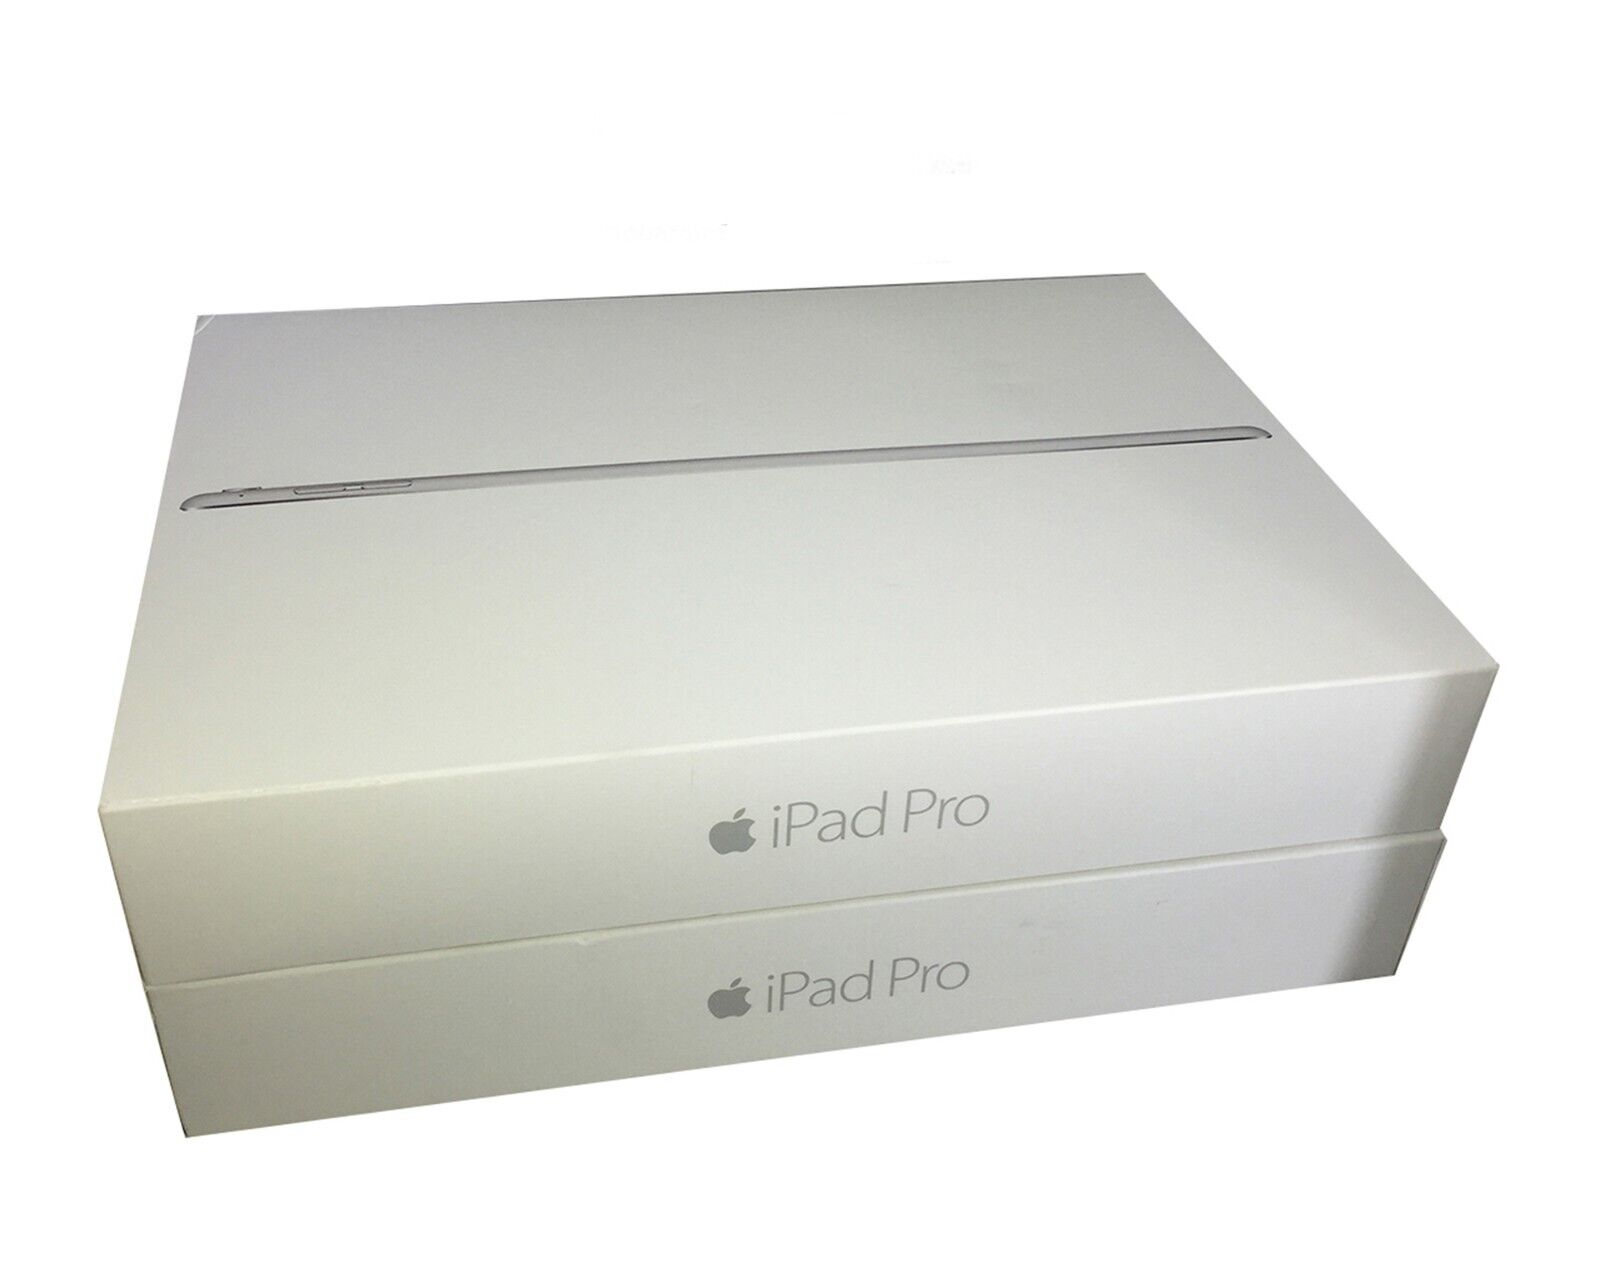 Comes in Original Box - Apple iPad Pro, 128GB, Gold, Wi-Fi Only, and 12.9-inch